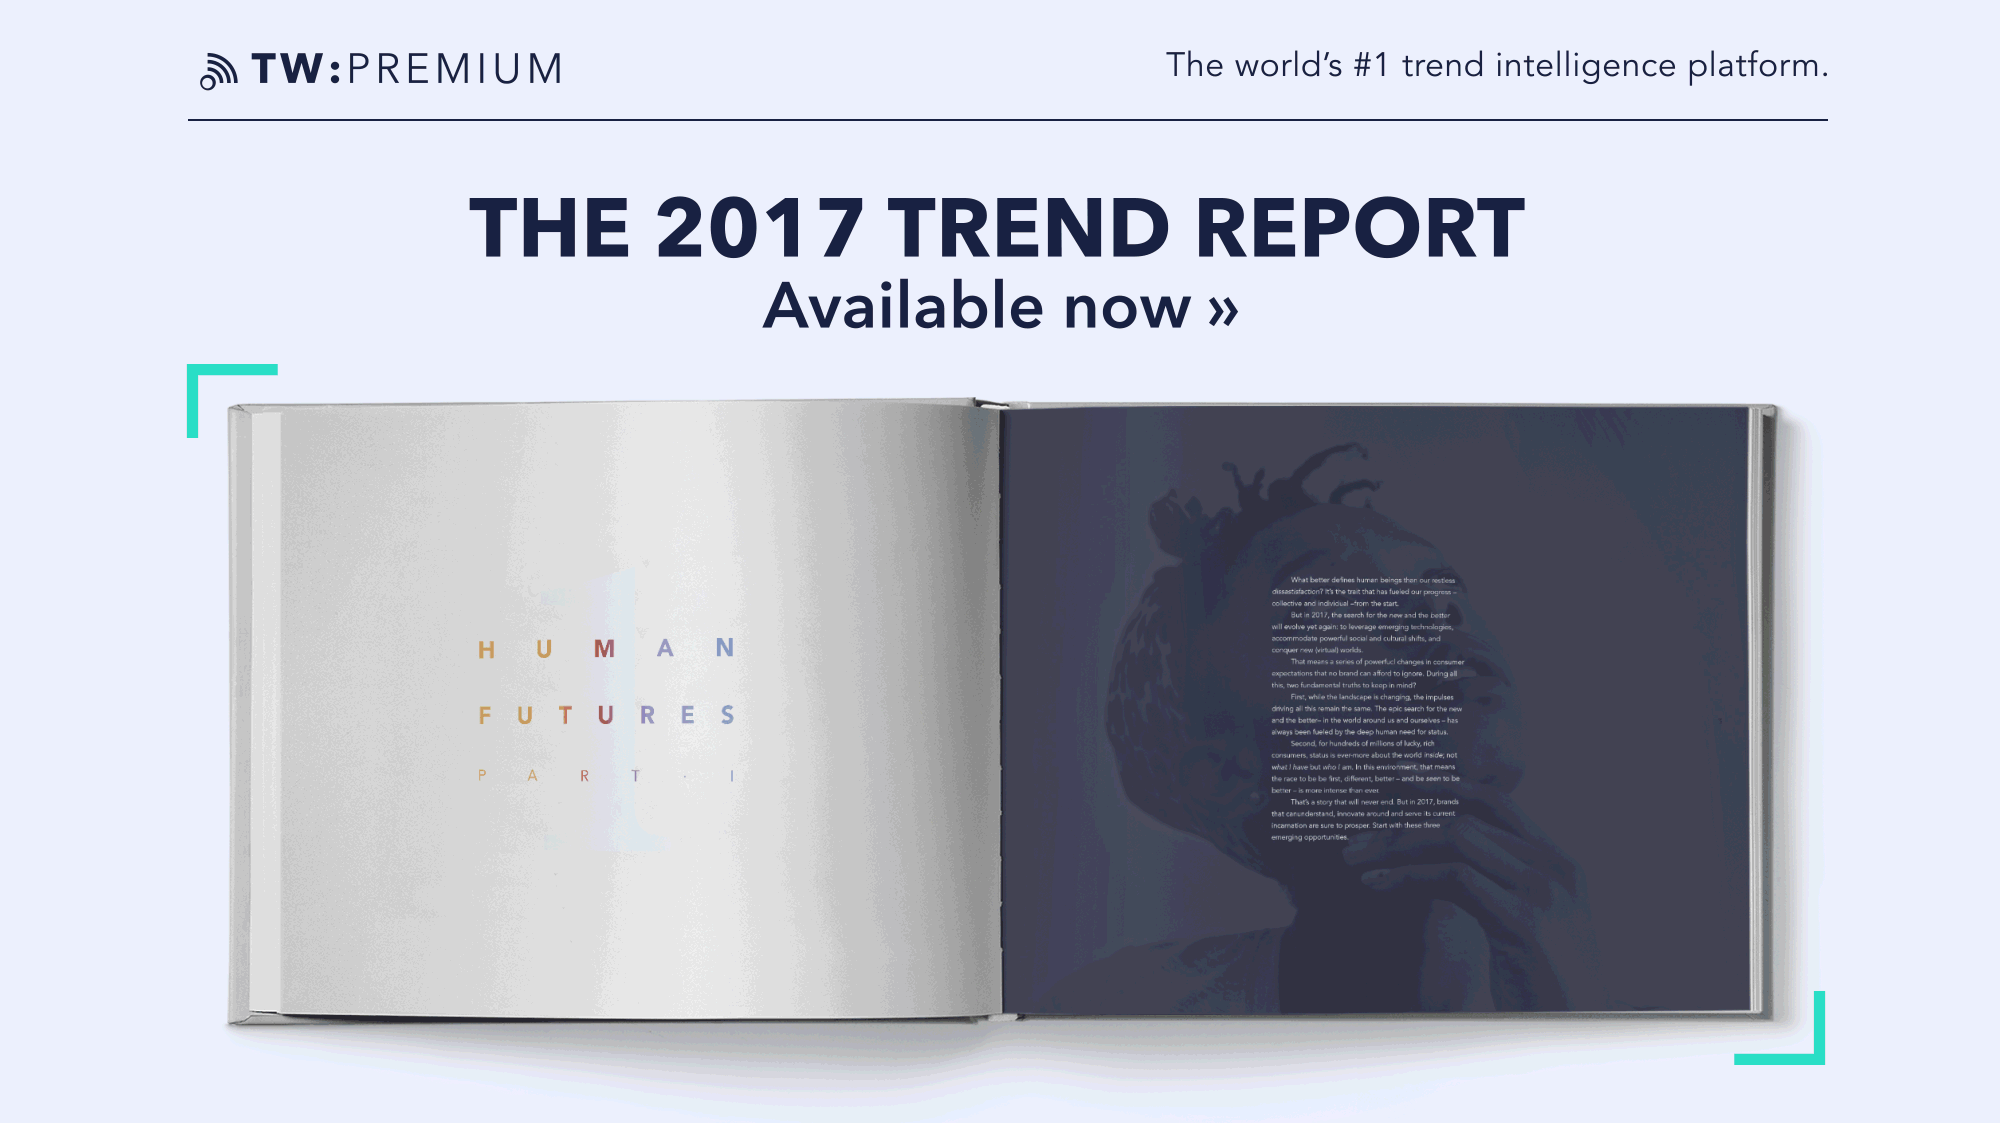 The 2017 Trend Report